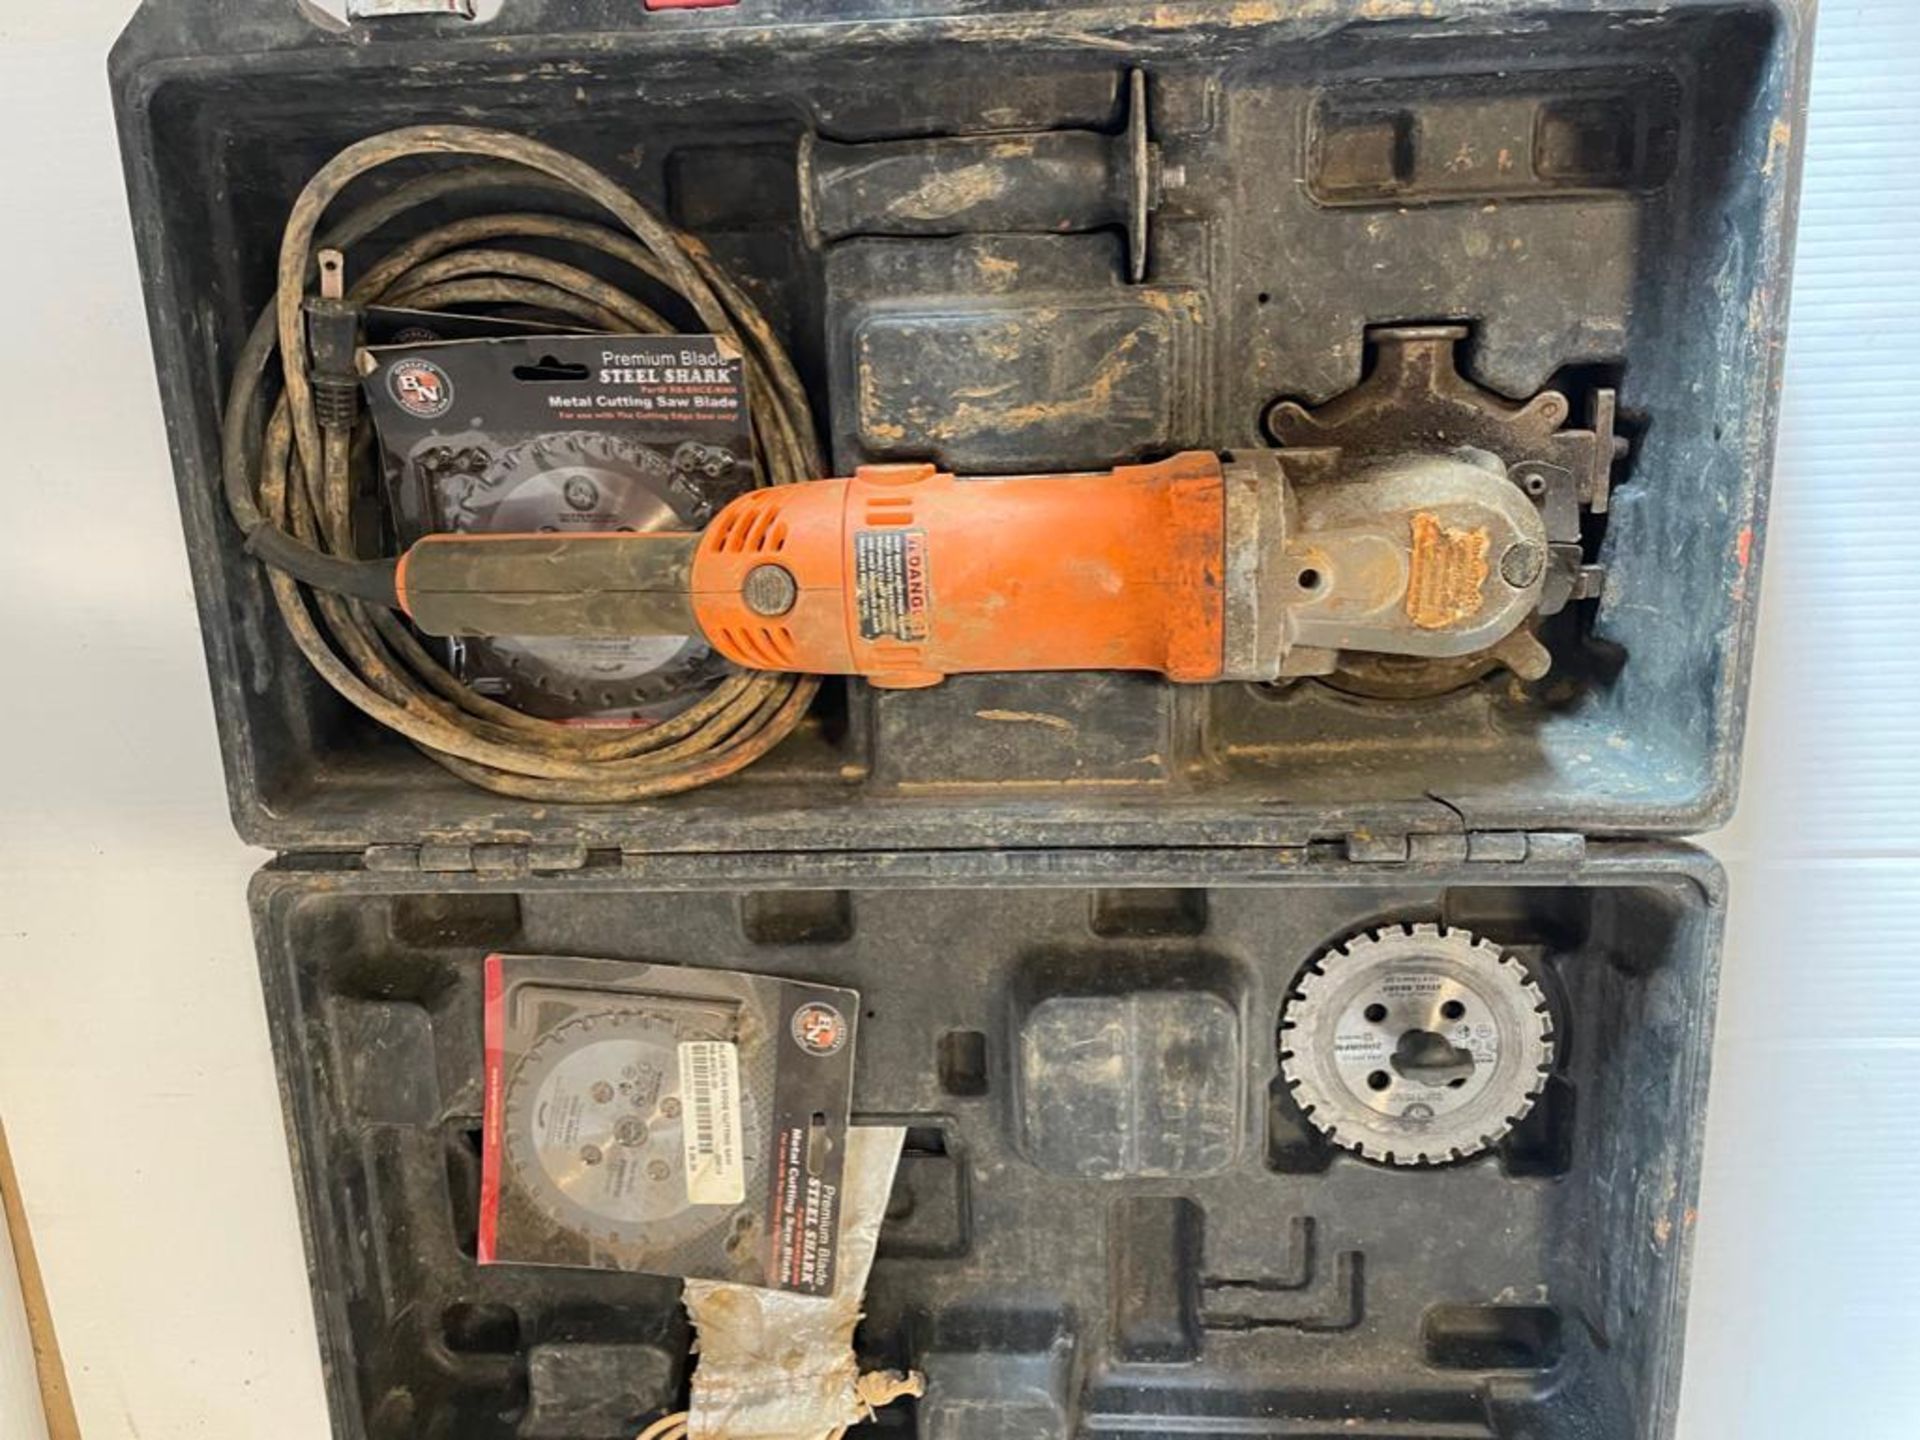 BN BNCE-20 Rotary Rebar Cutting Saw, Serial #1504 0025 E1. 120V in Case. Located in Hazelwood, MO - Image 2 of 6